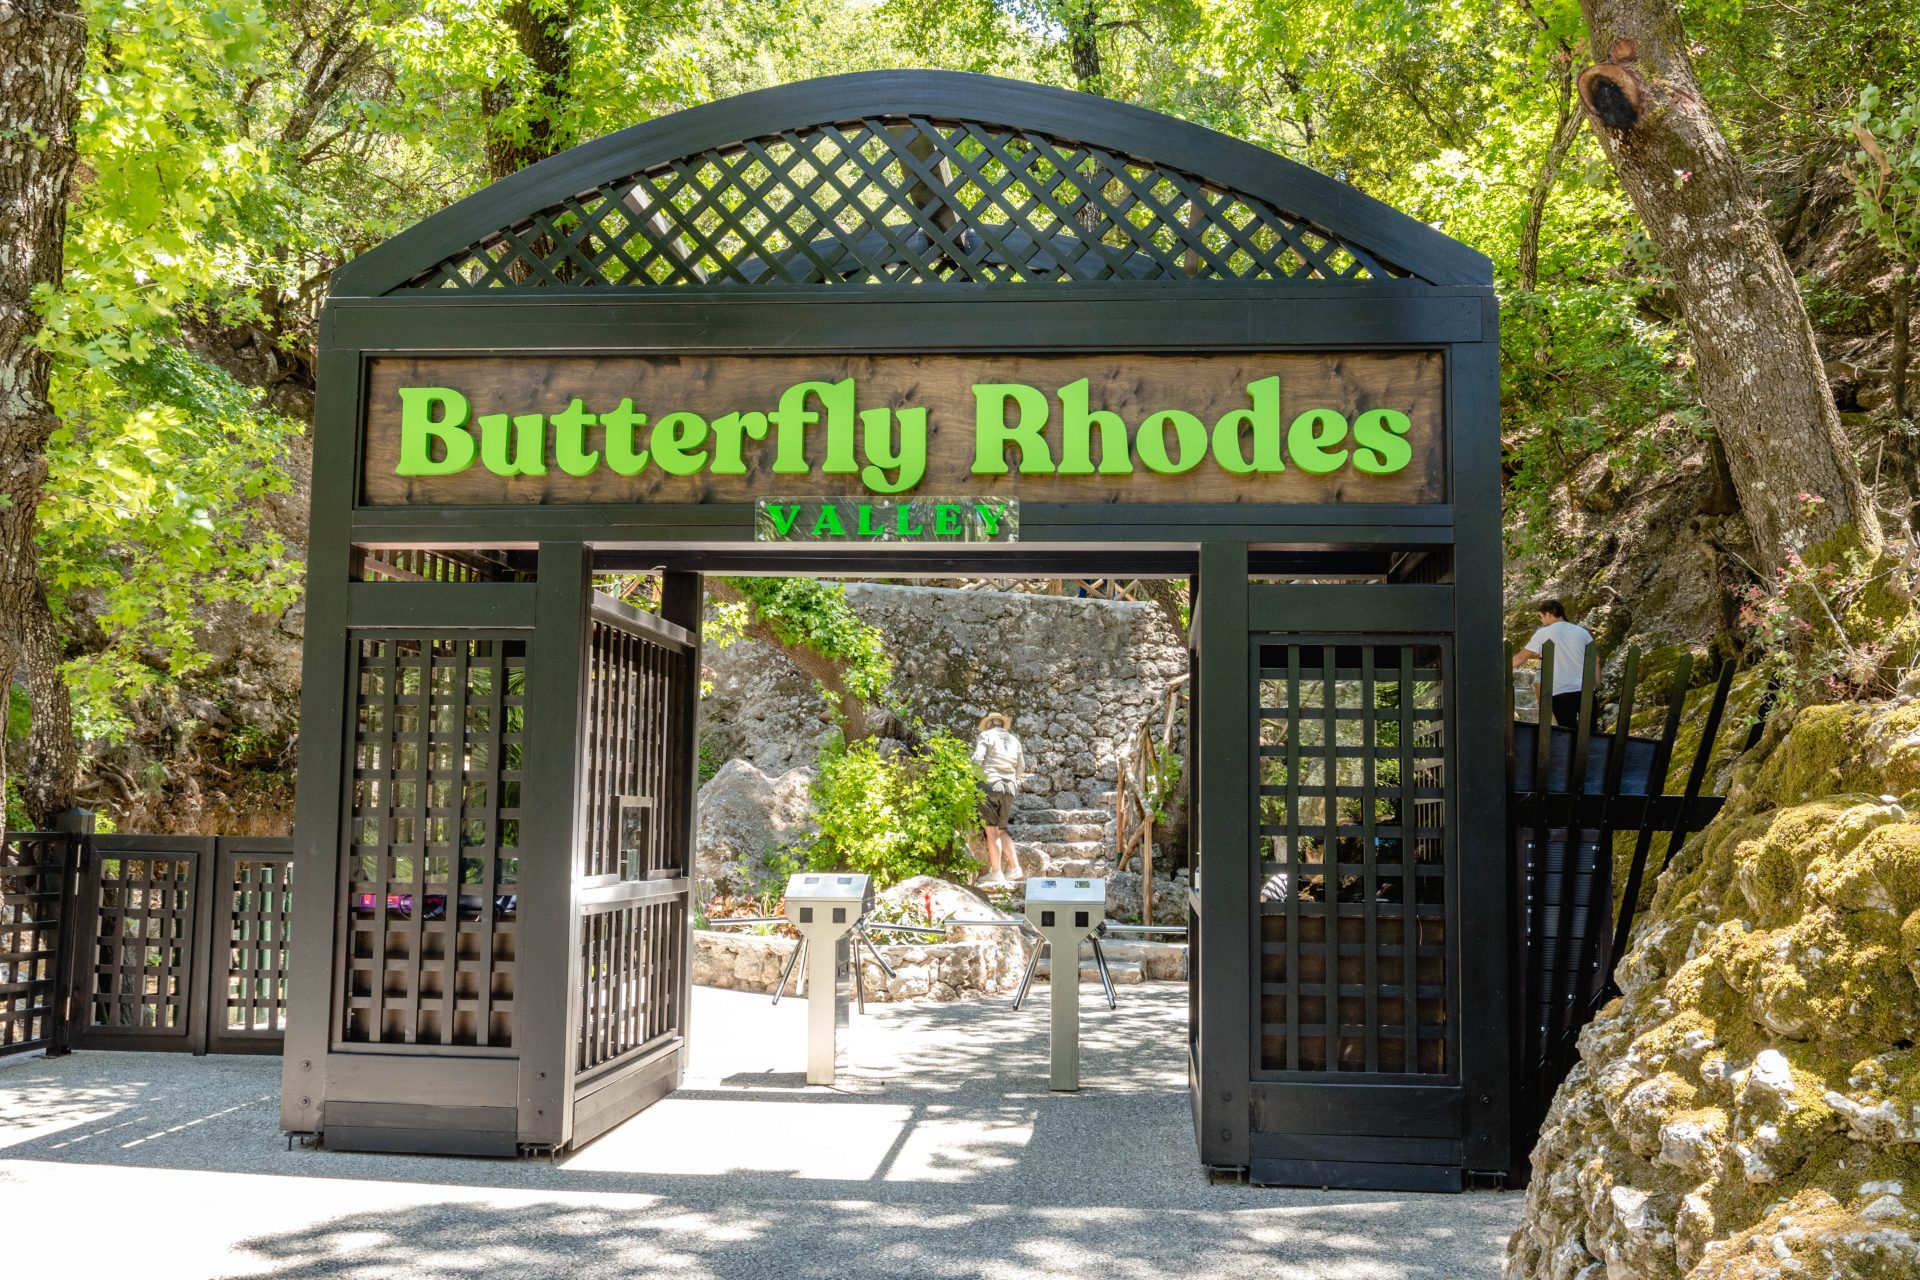 The Valley of the Butterflies Rhodes Travel Guide